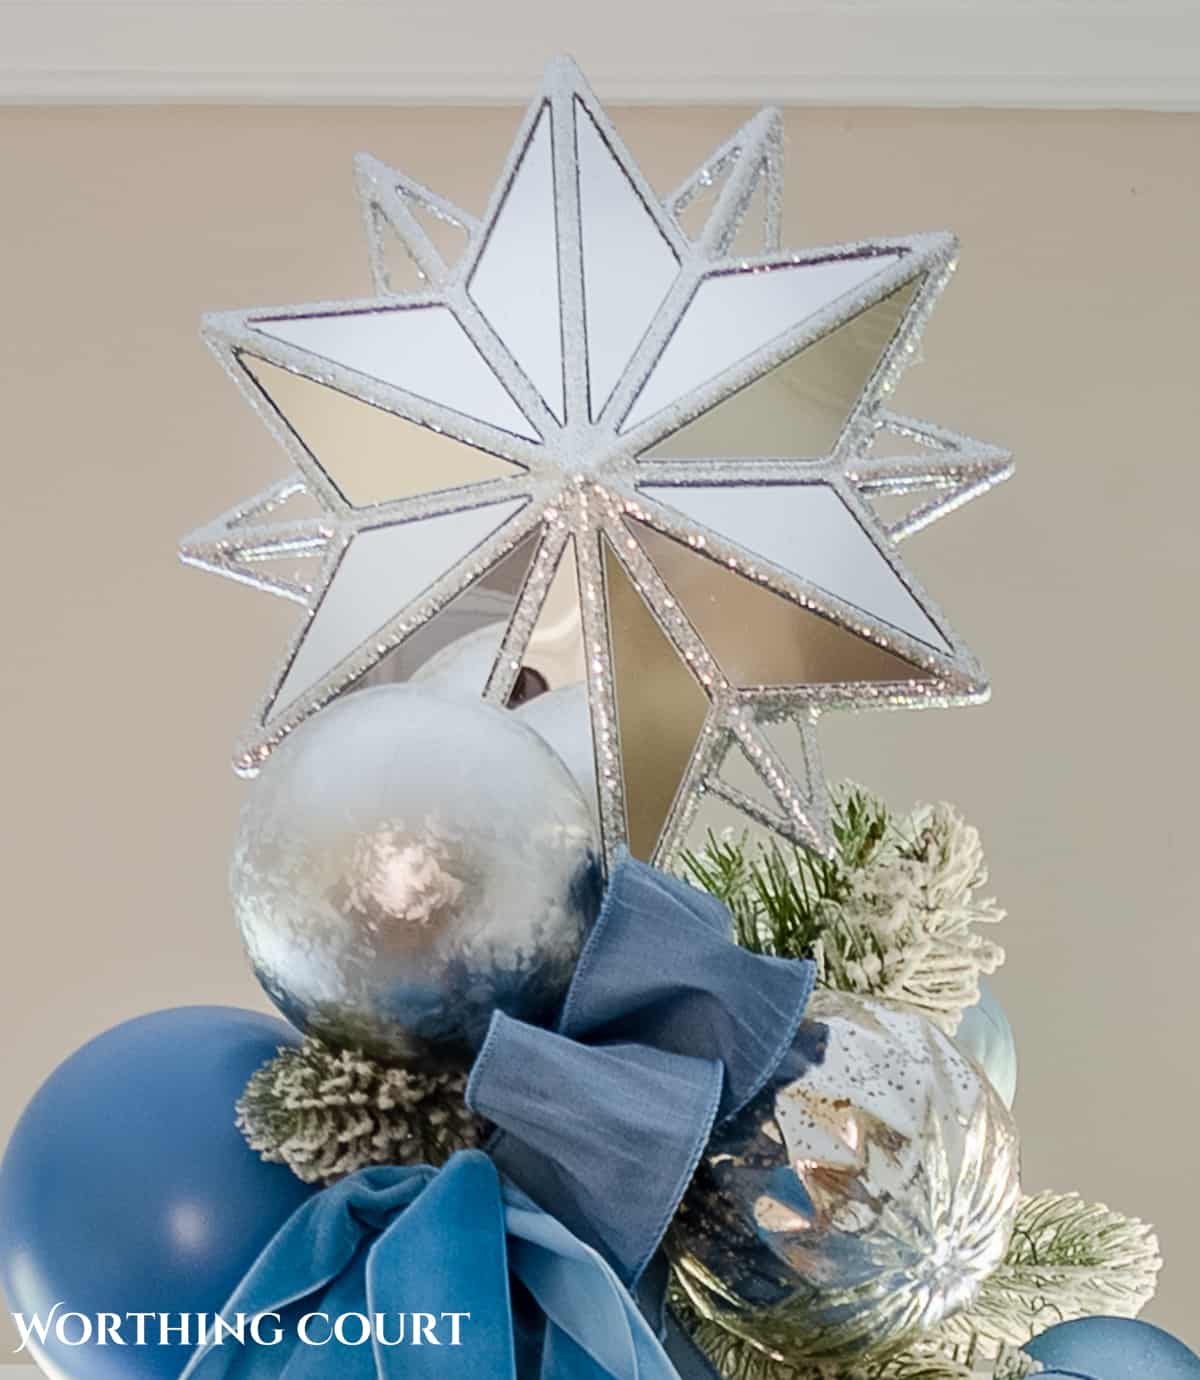 flocked Christmas tree decorated with French blue and silver ornaments and ribbon topped with a mirrored silver star